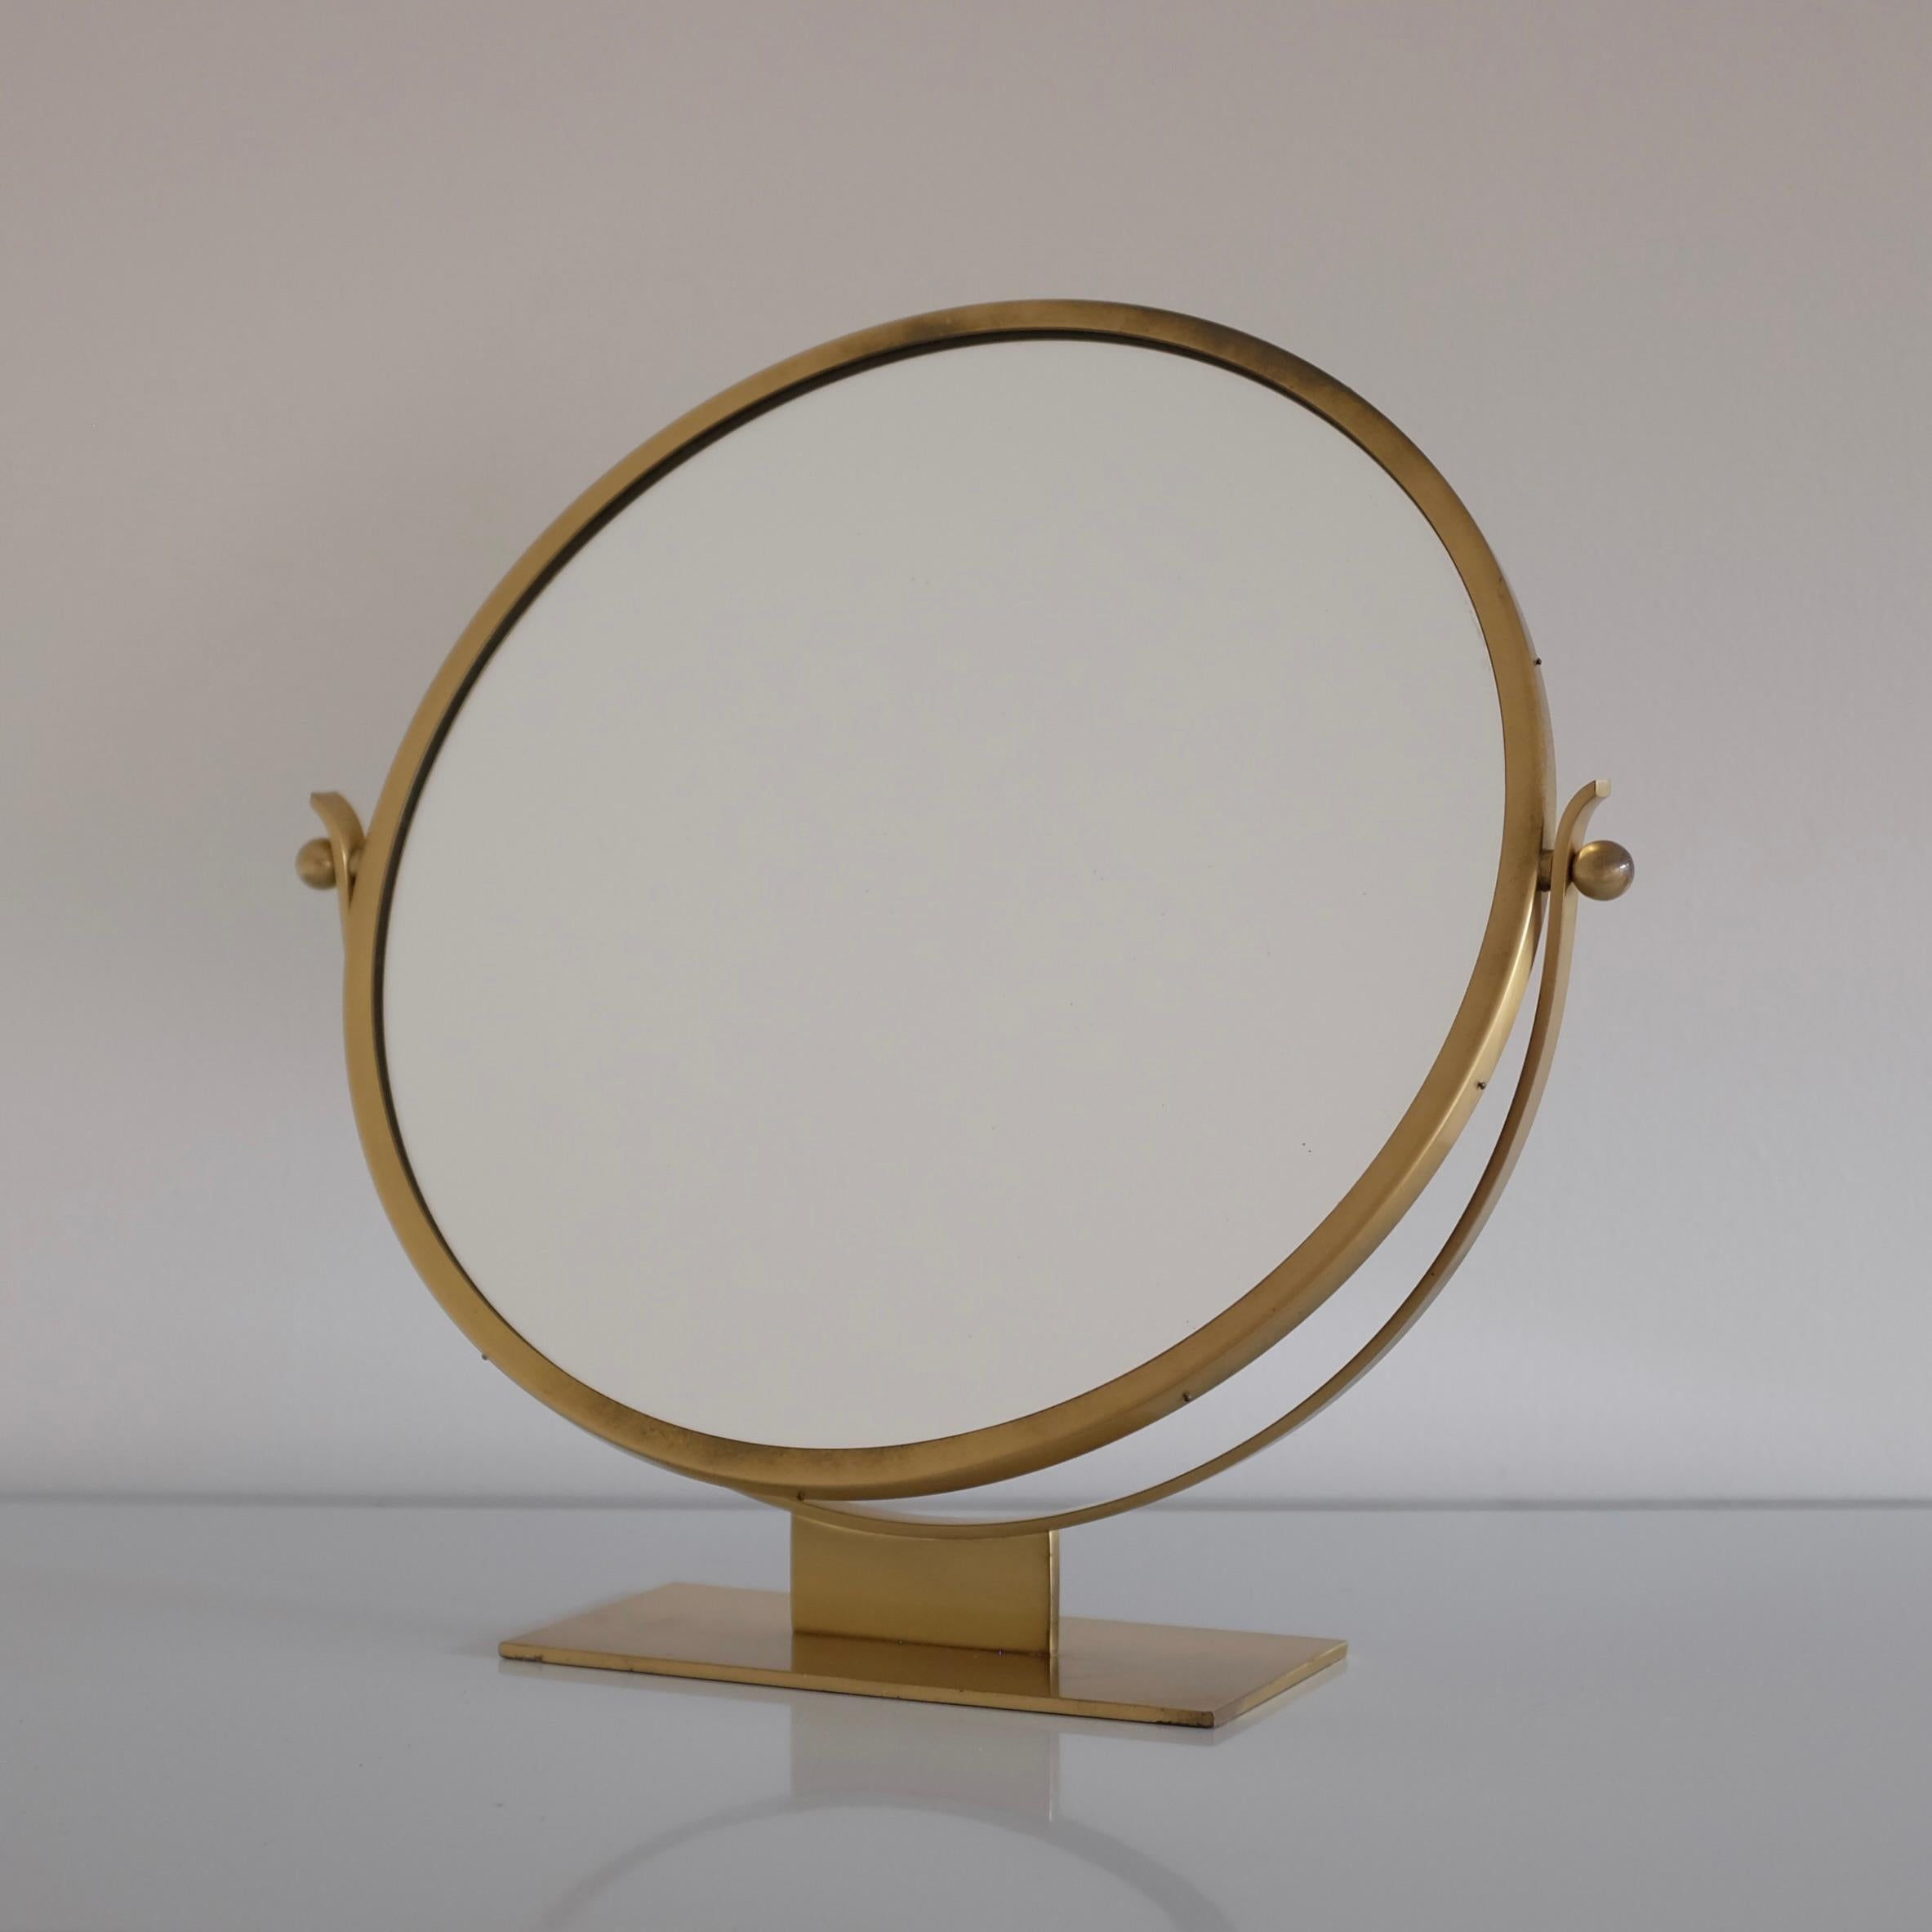 Beautiful 1940/50s Brass Table Mirror by Ystad metall, Sweden. Brass base and frame with a teak on the back of the mirror it is highly decorative in its simple and elegant design. Age appropriate wear with some small marks, overall in a very good